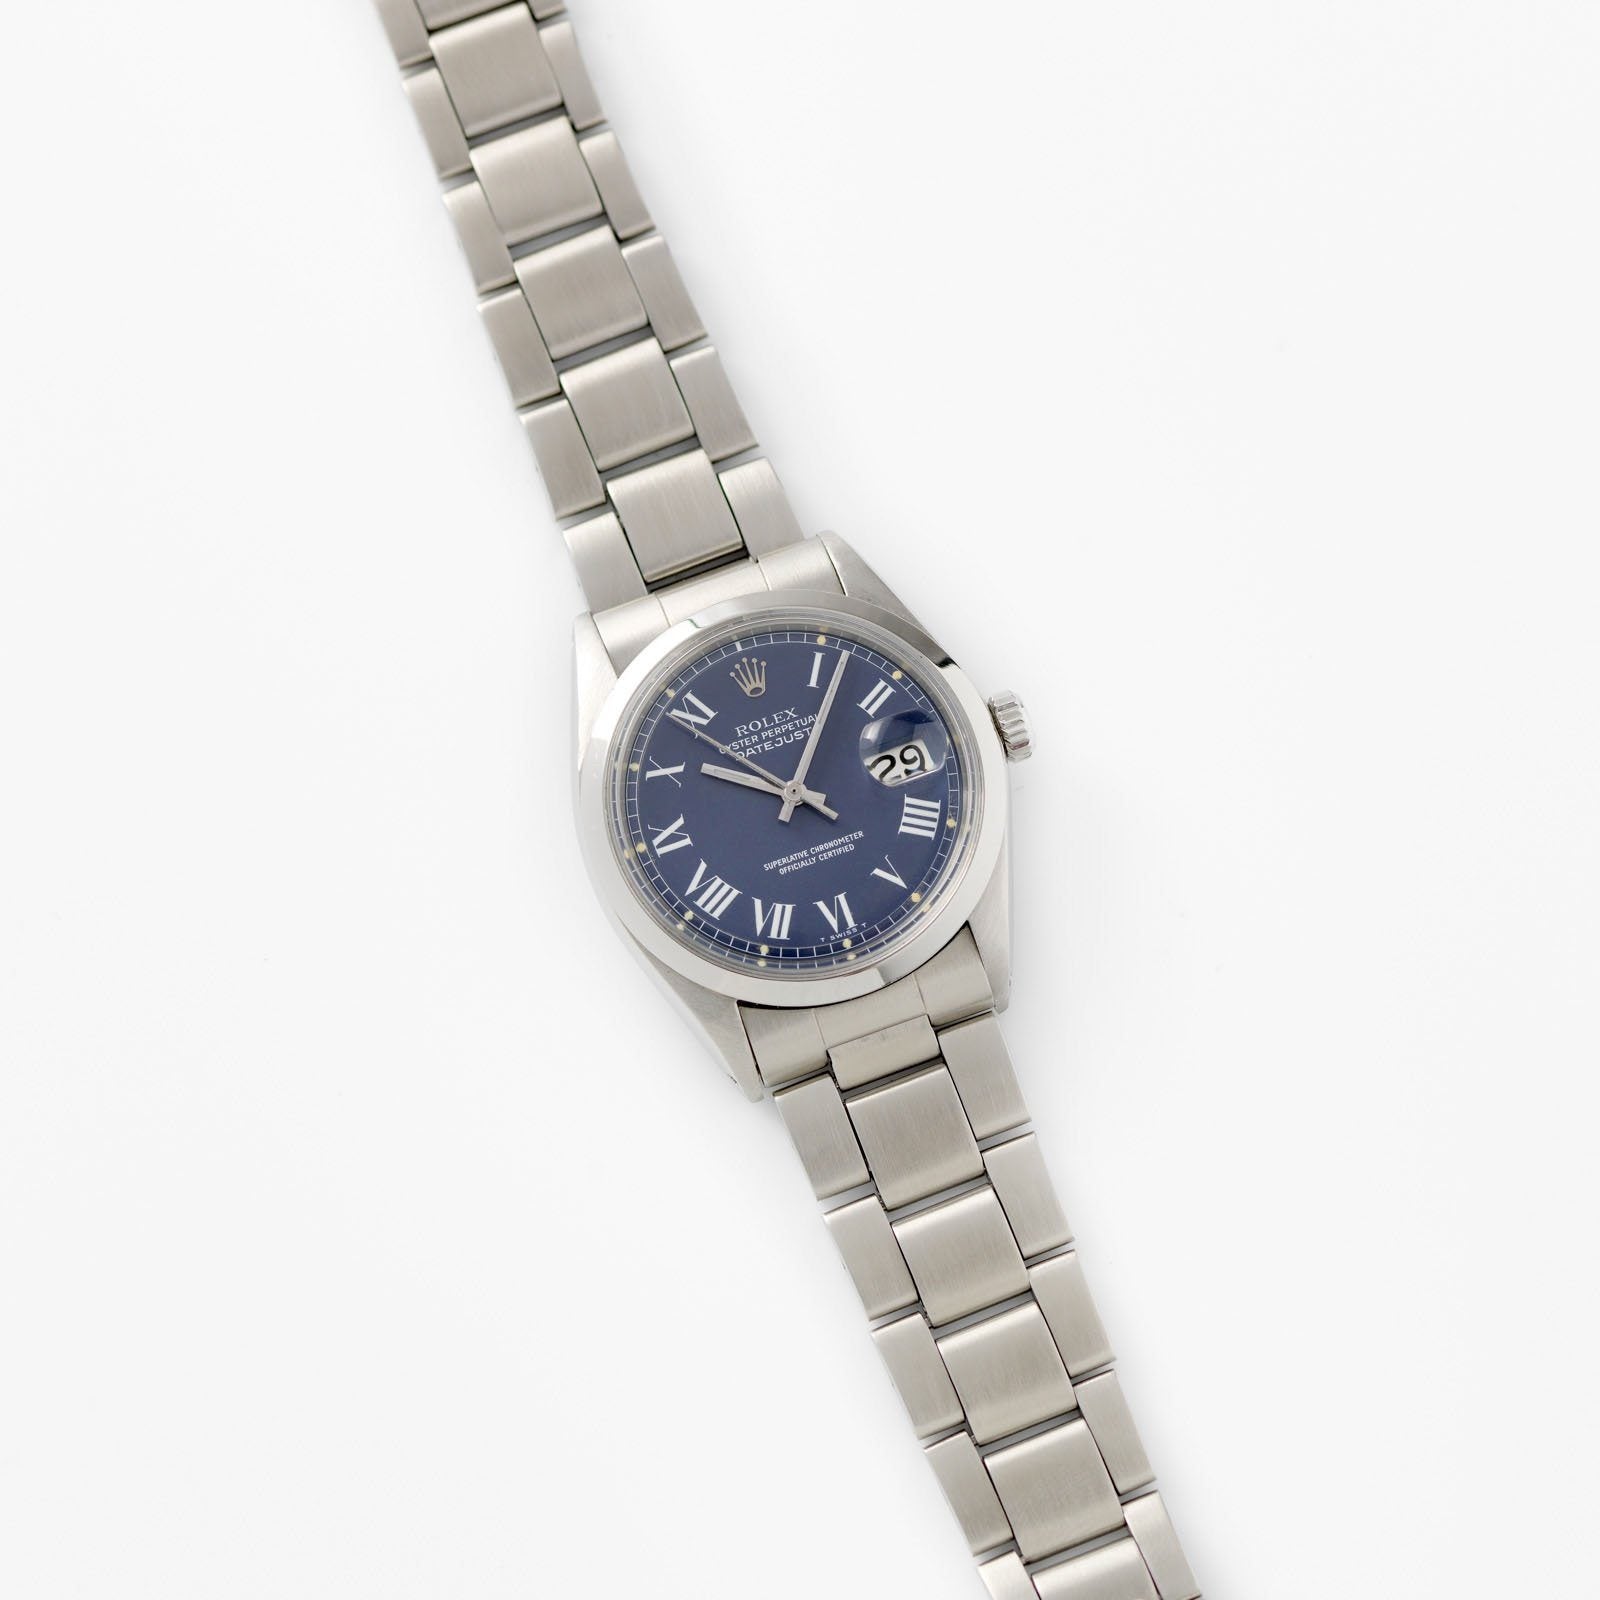 Rolex Datejust Reference 1600 Blue Buckley Dial